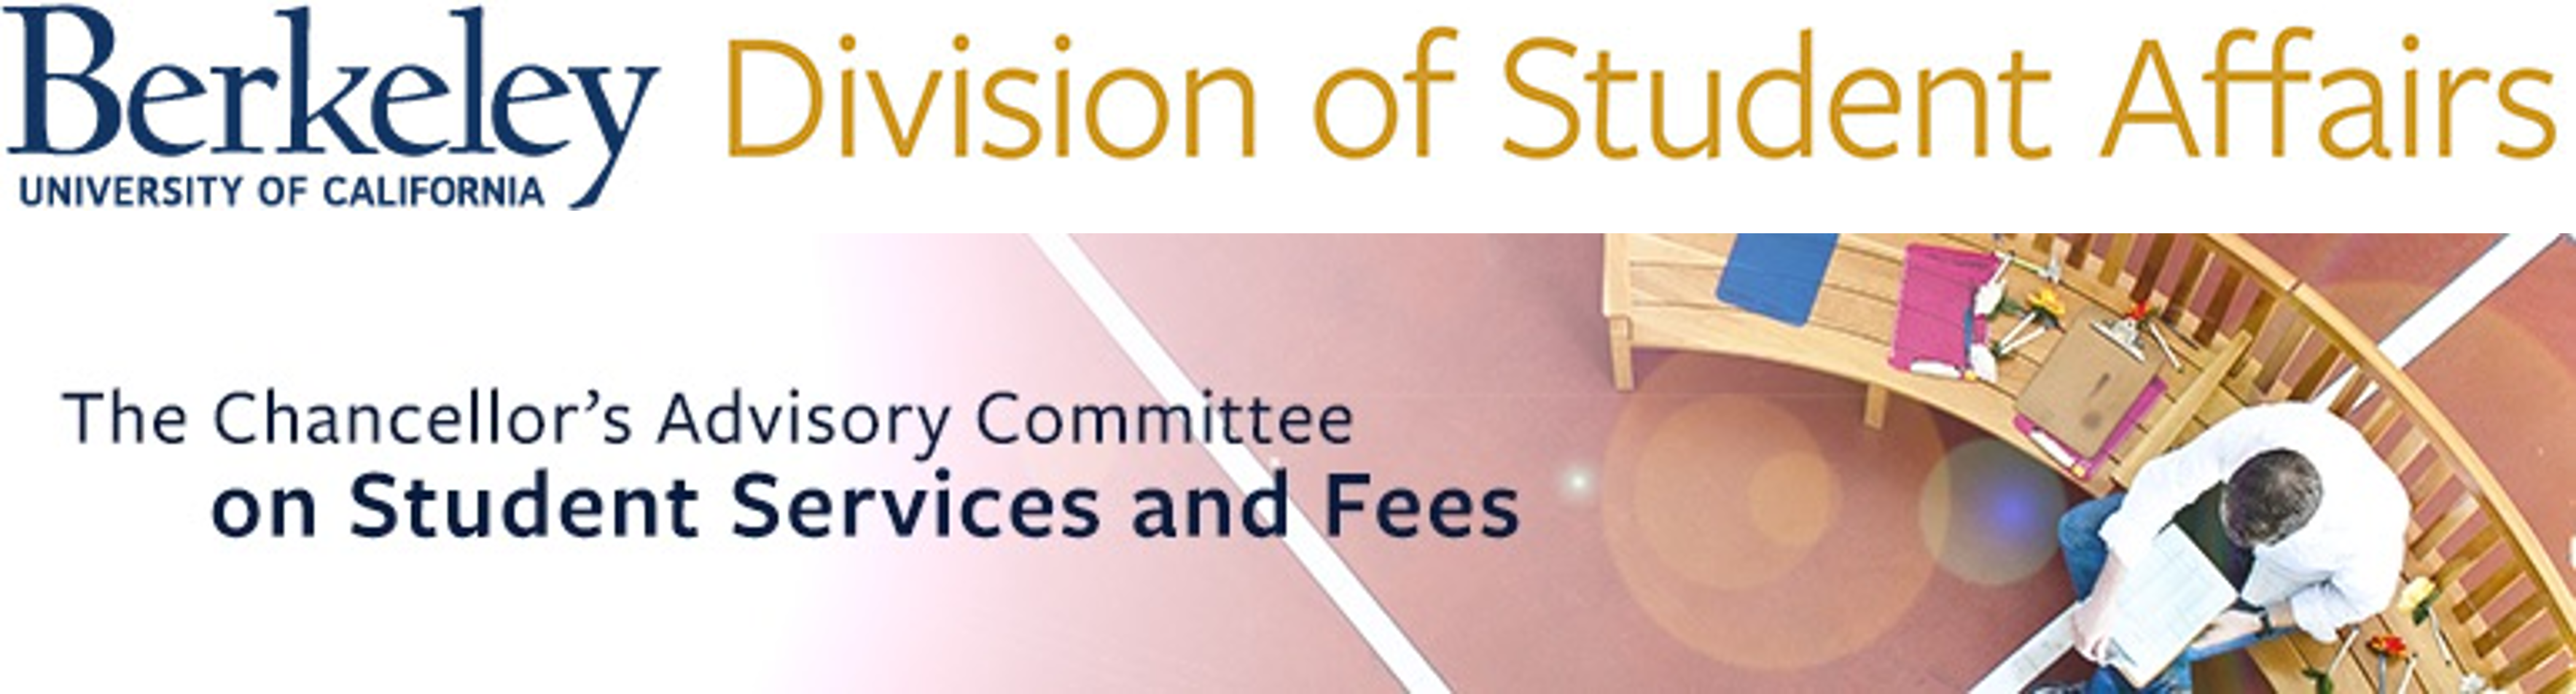 UC Berkeley Division of Student Affairs Chancellor's Advisory Committee on Student Services and Fees